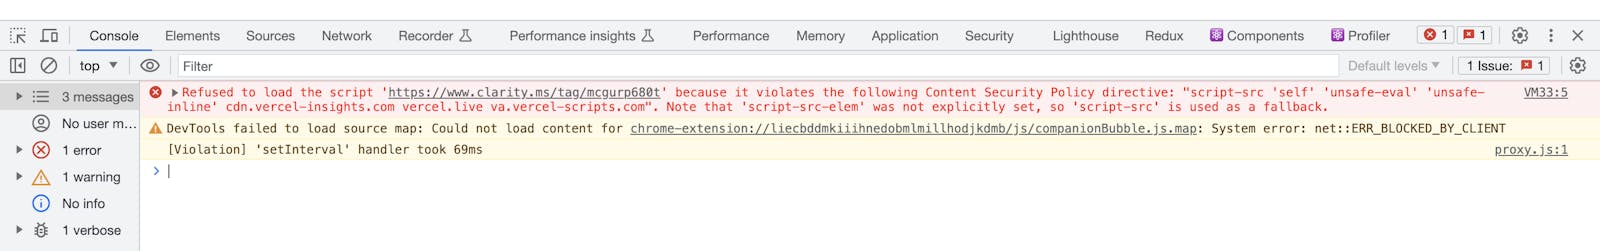 How I fixed this Next.js error: Refused to load the script ‘some_script_url’ because it violate the following Content Security Policy directive